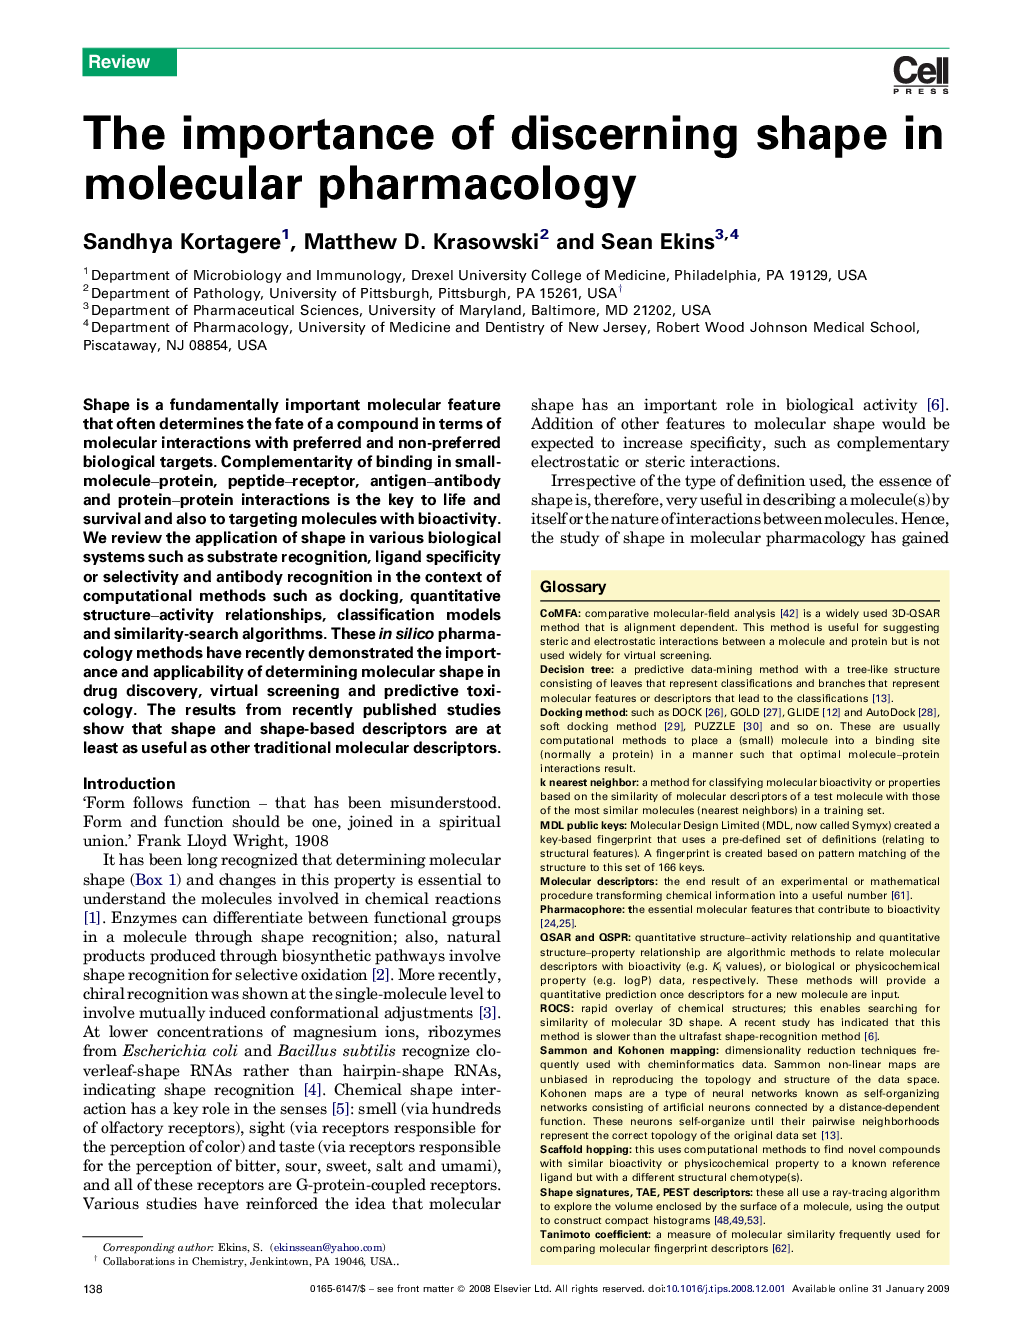 The importance of discerning shape in molecular pharmacology